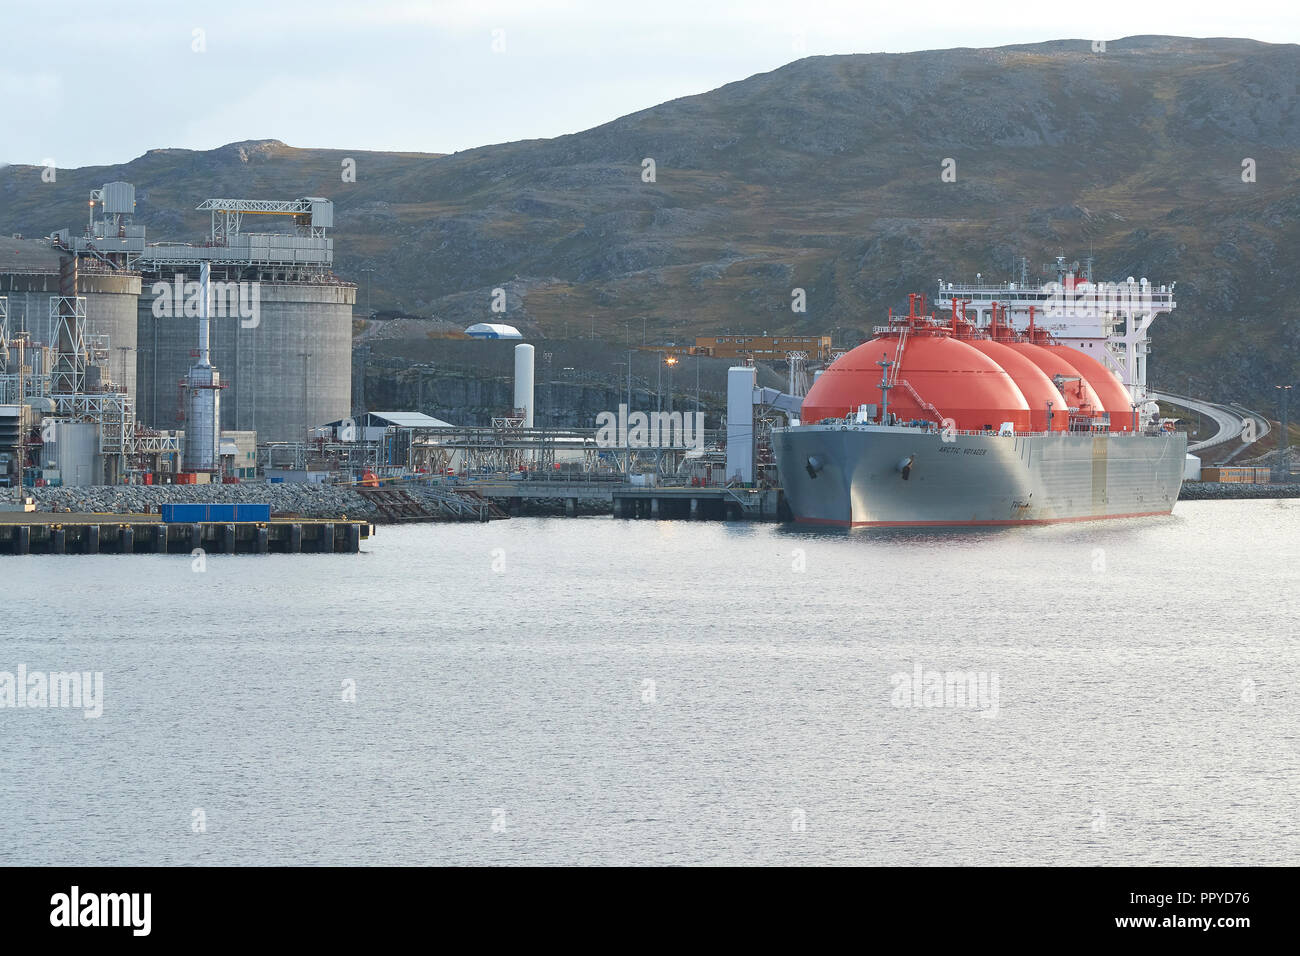 The Giant LNG (Liquified Natural Gas) Carrier, ARCTIC VOYAGER, Loading At The Melkøya LNG Processing Facility, Hammerfest, Norway. Stock Photo